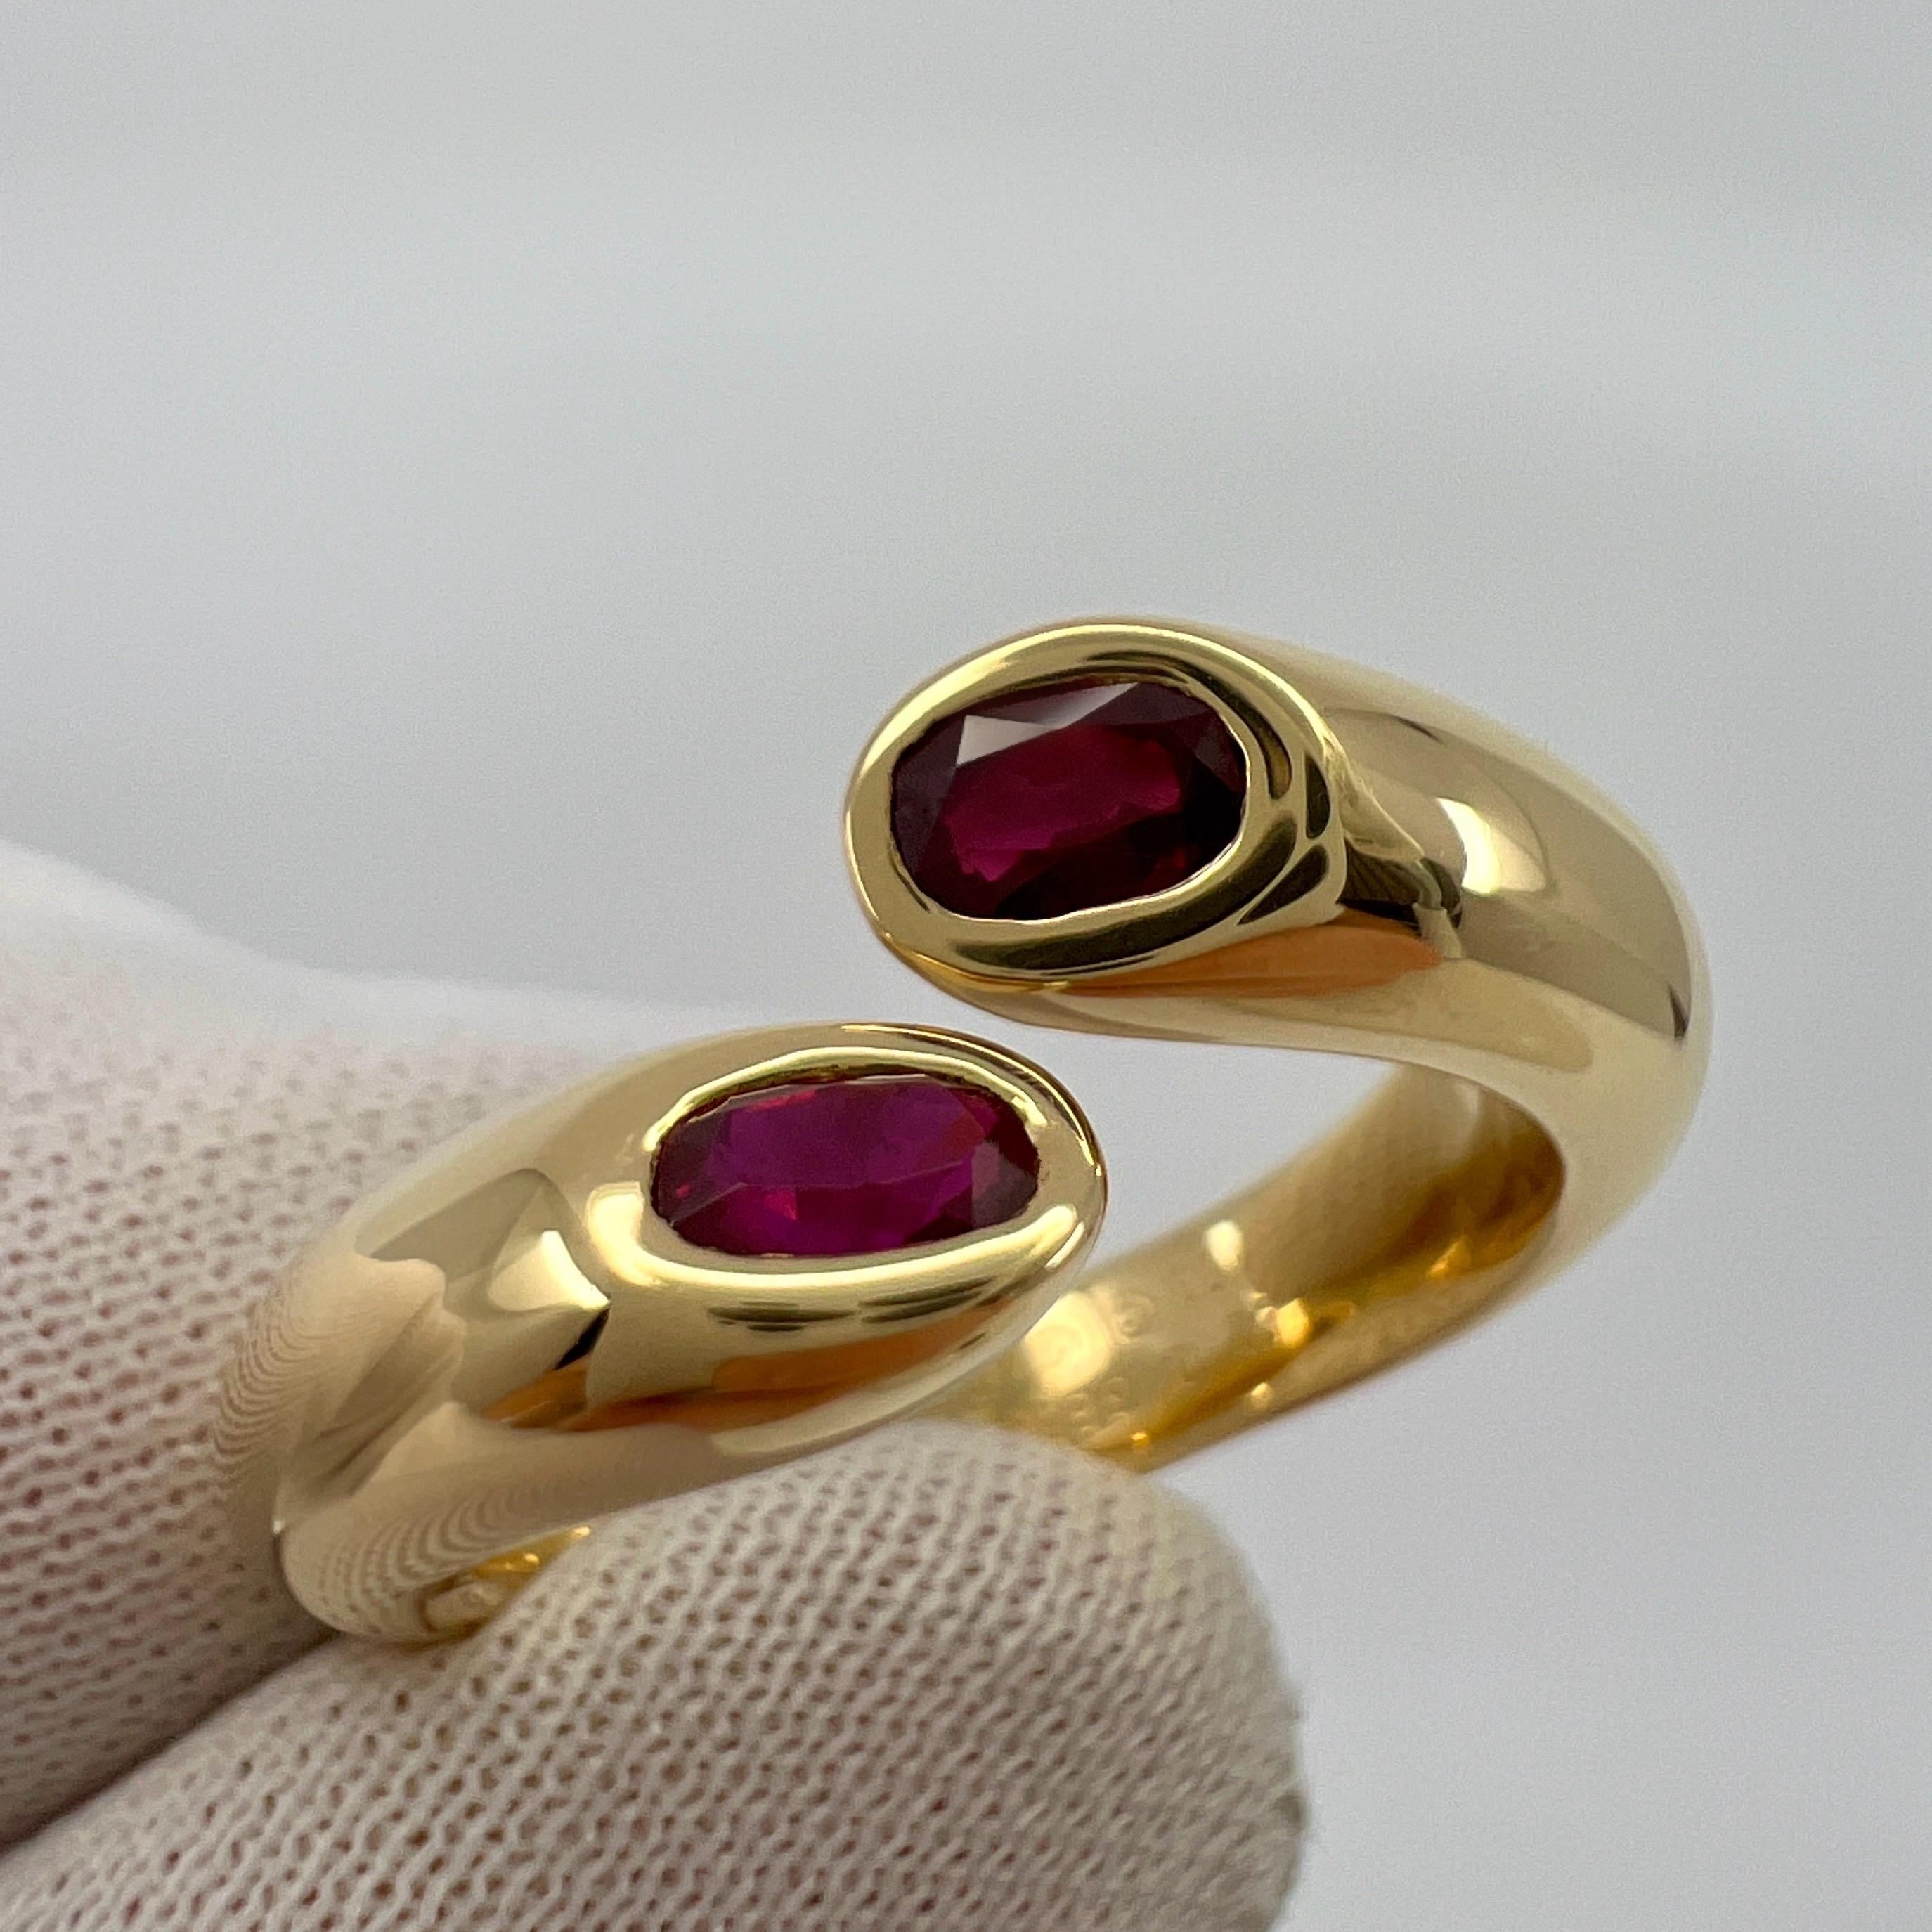 Rare Vintage Cartier Red Ruby Ellipse Oval Cut 18k Gold Bypass Split Ring 48 4.5 For Sale 6